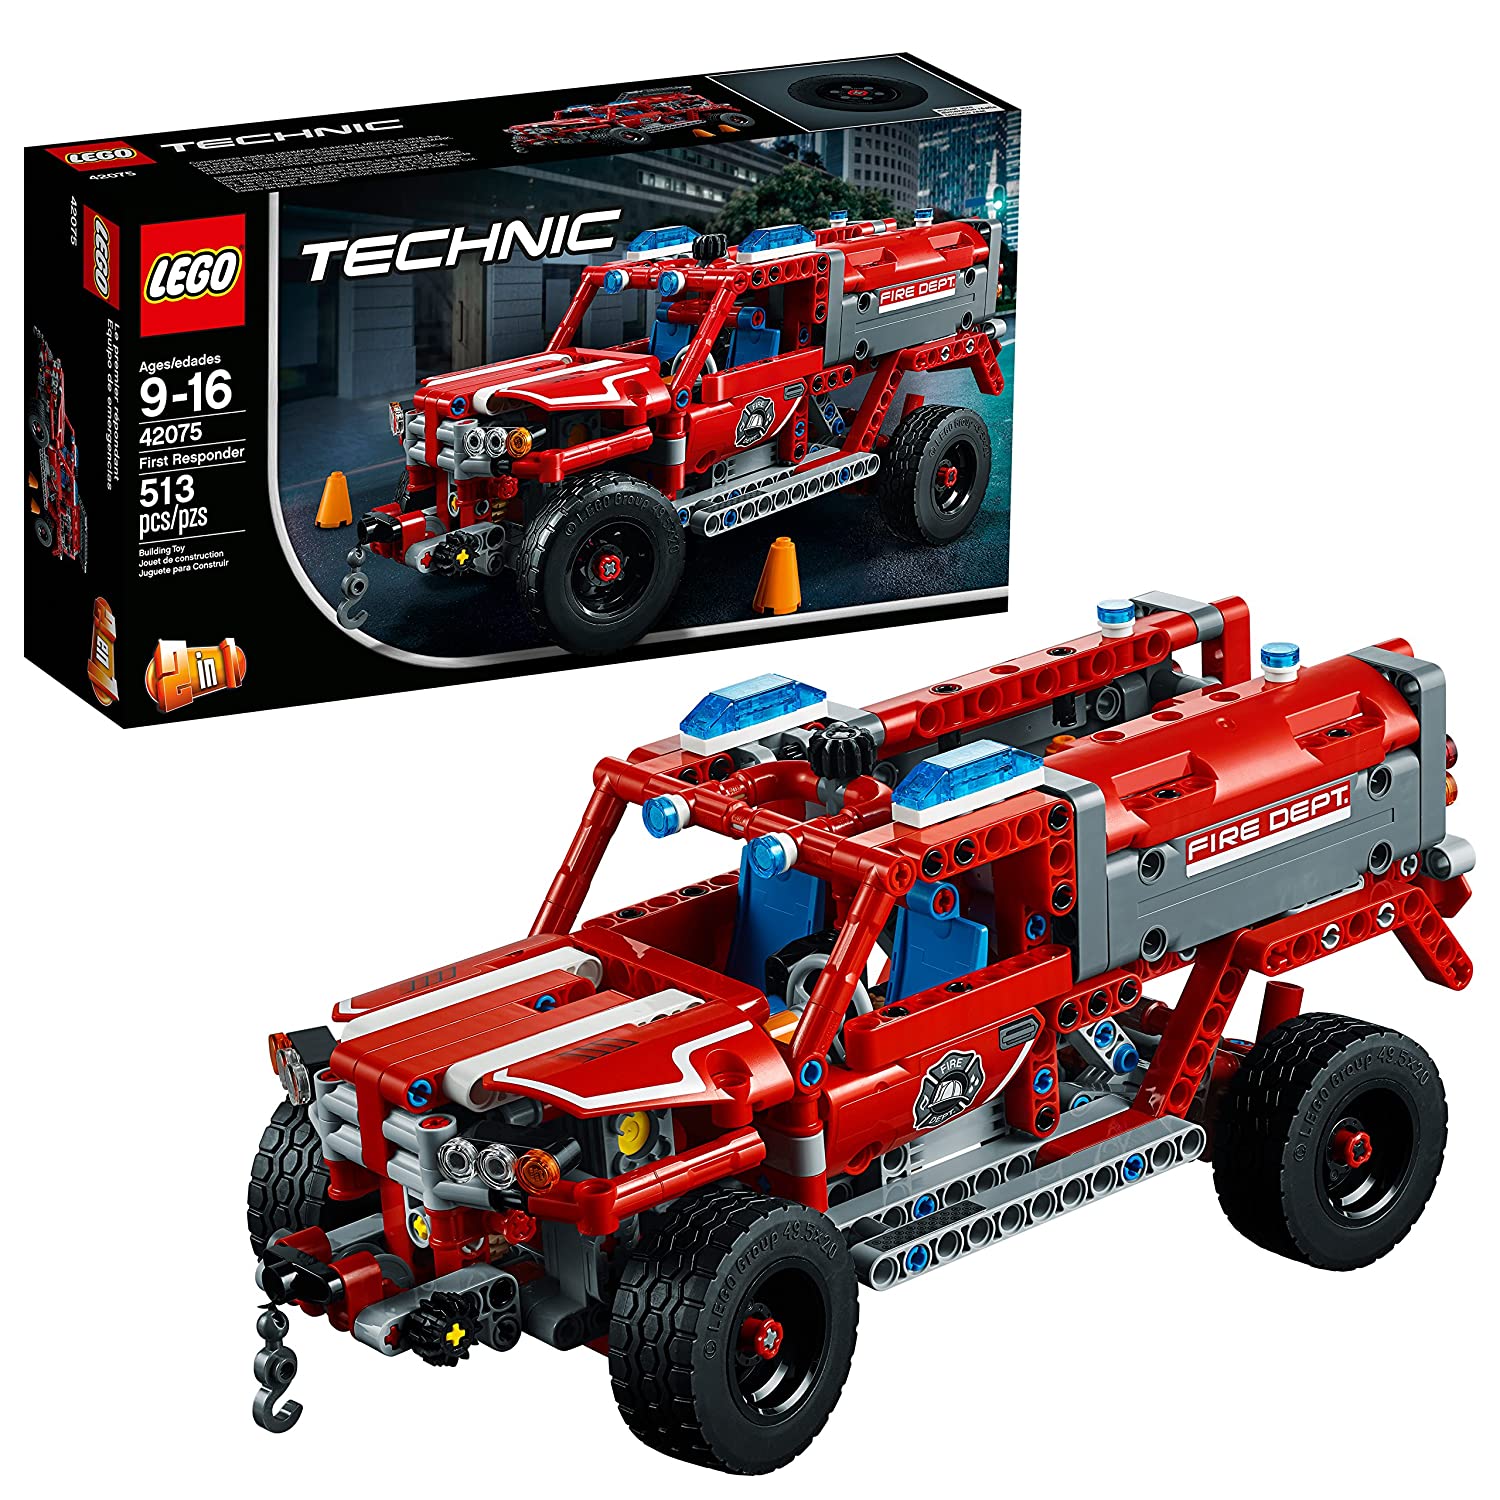 LEGO Technic First Responder 42075 Building Kit (513 Pieces)